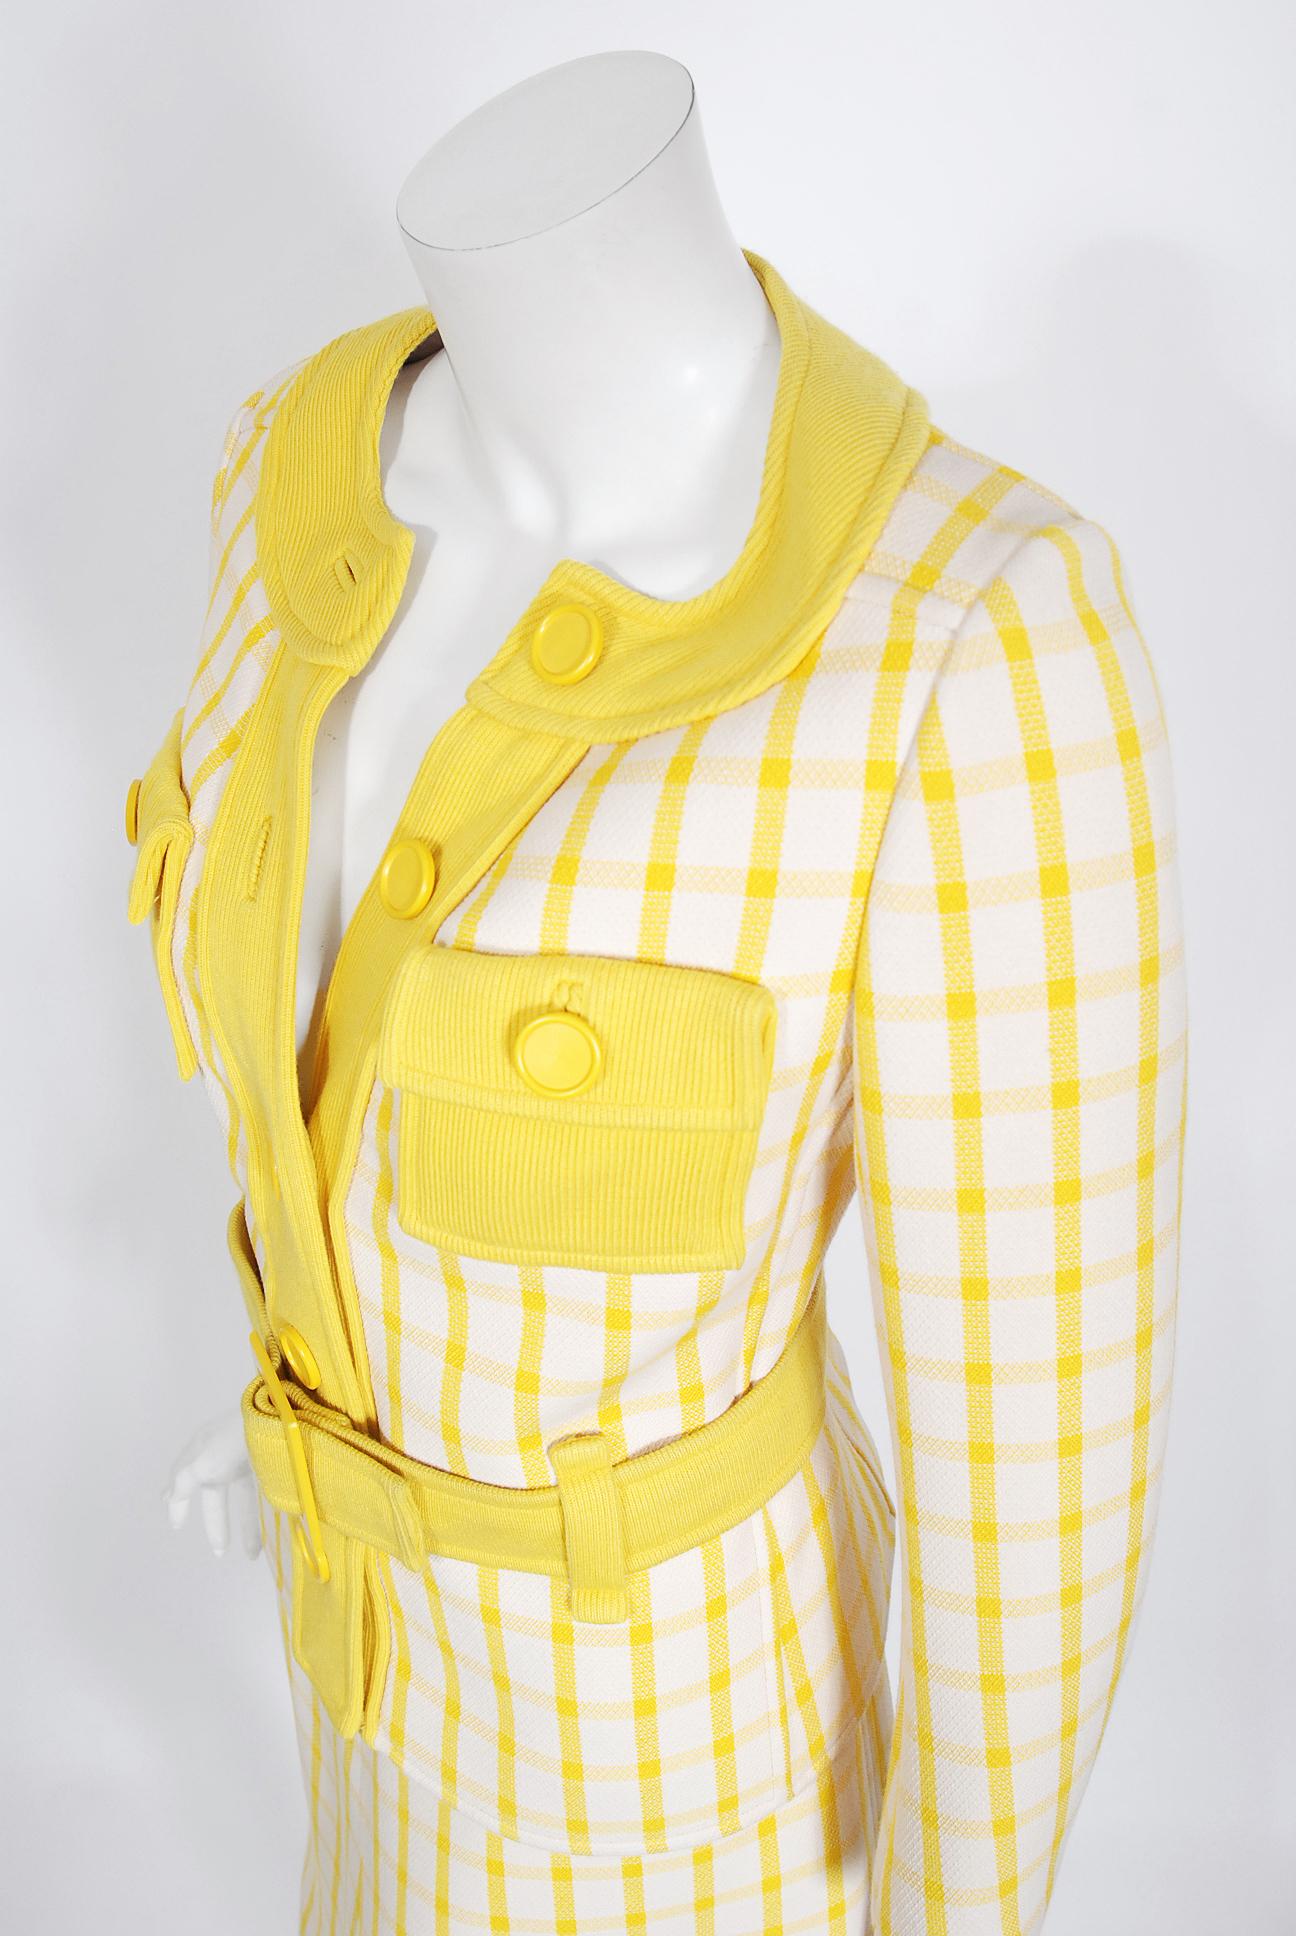 Vintage 1967 Courreges Couture Yellow White Checkered Wool Belted Jacket & Skirt In Good Condition For Sale In Beverly Hills, CA